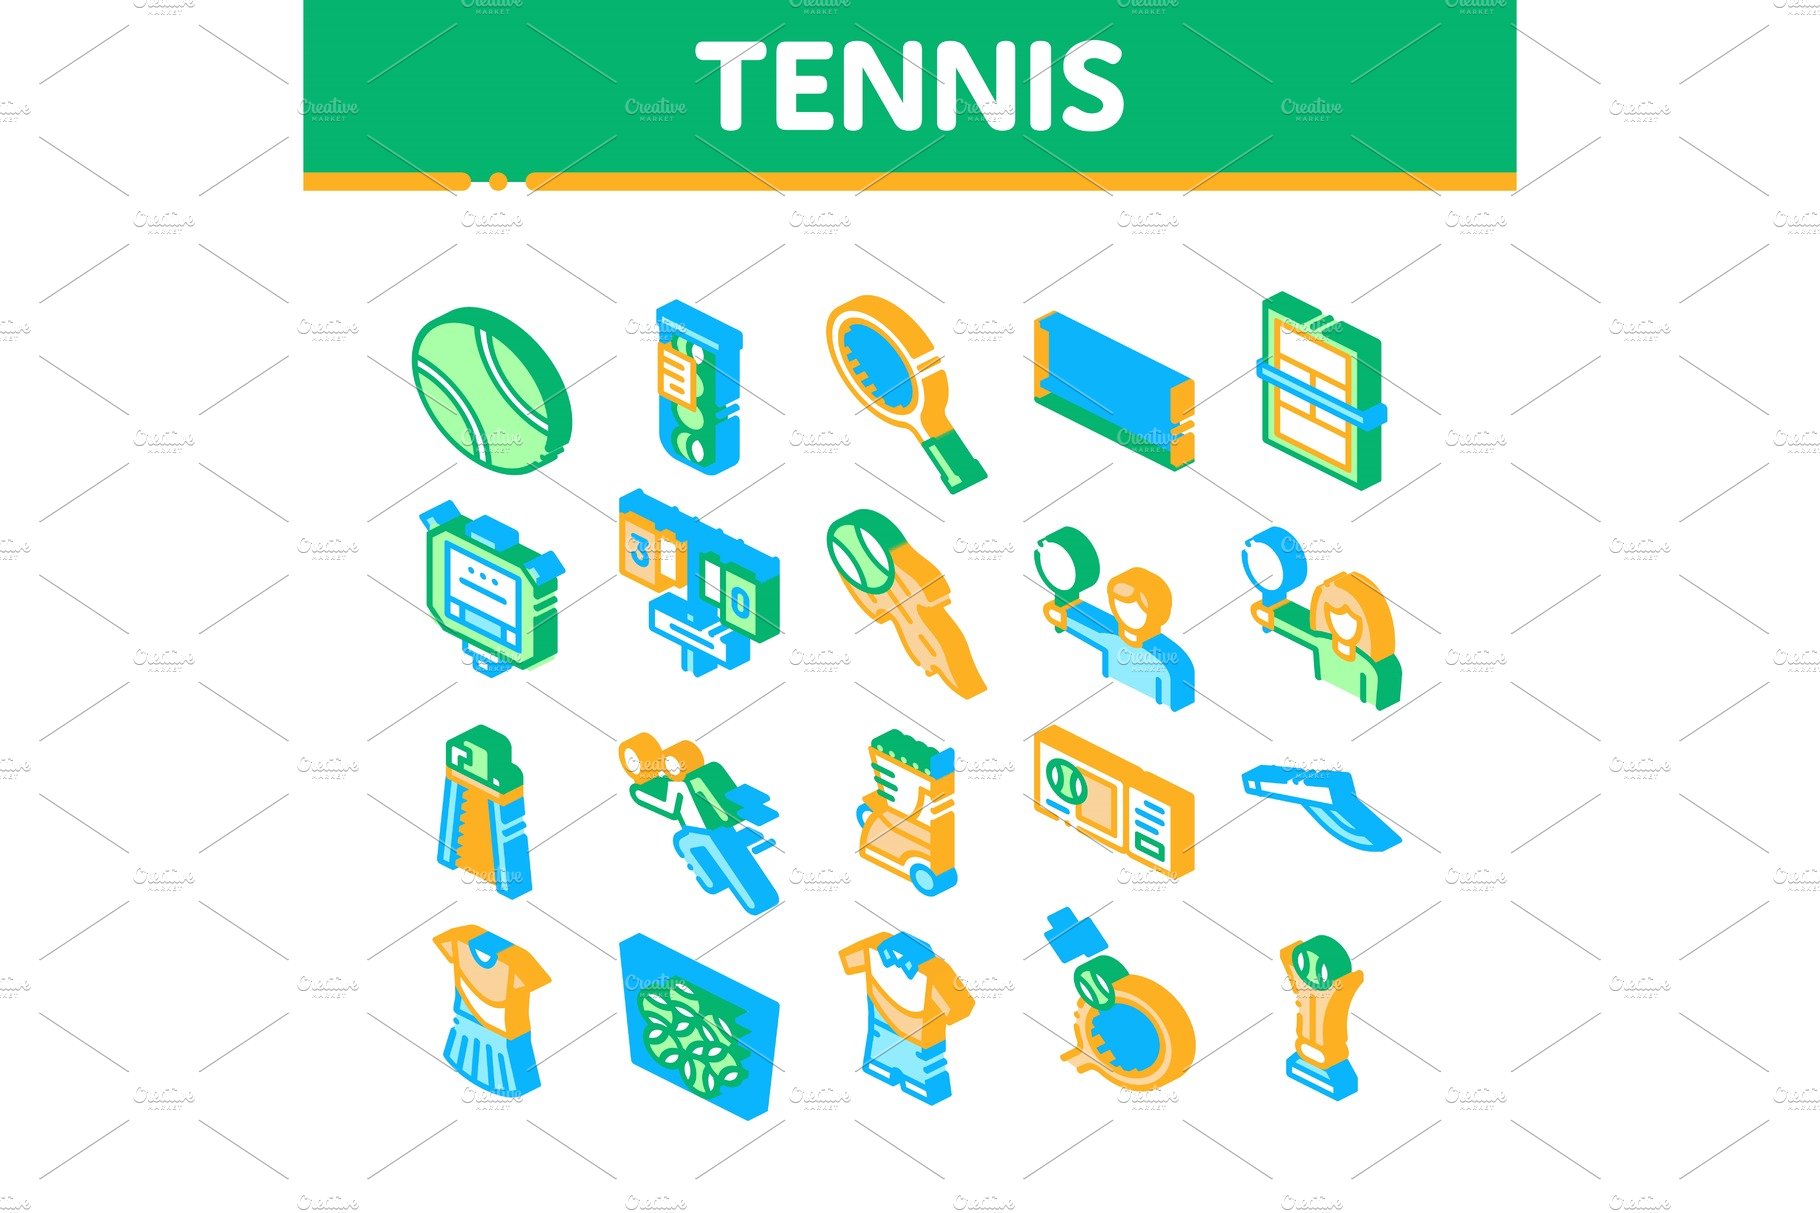 Tennis Game Equipment Isometric cover image.